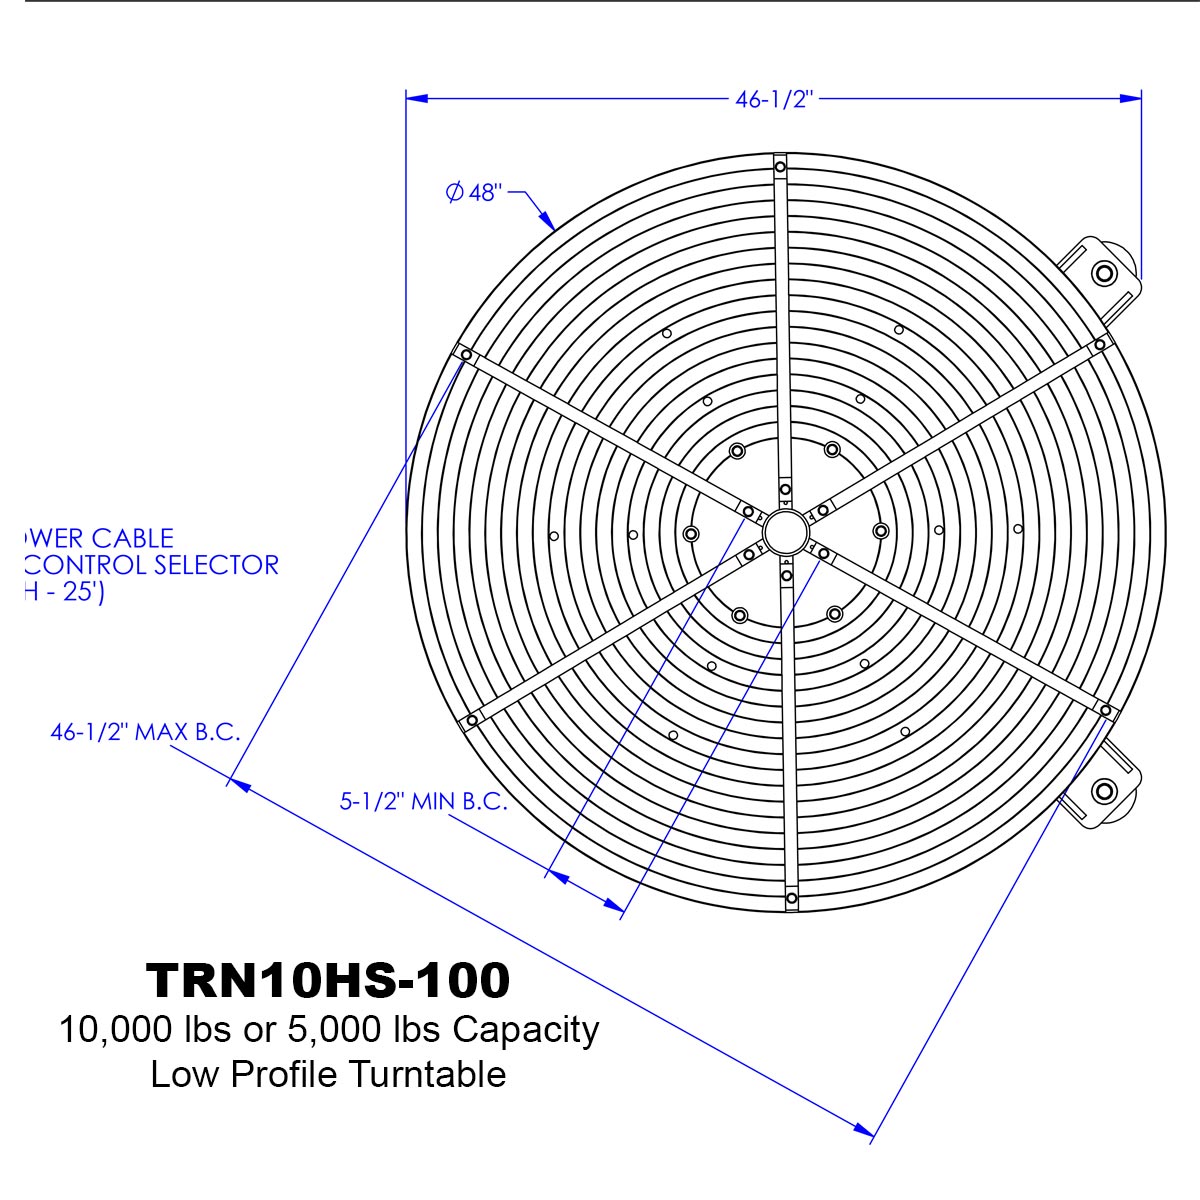 03-10000lb-or-5000lb-Low-Profile-Turntable